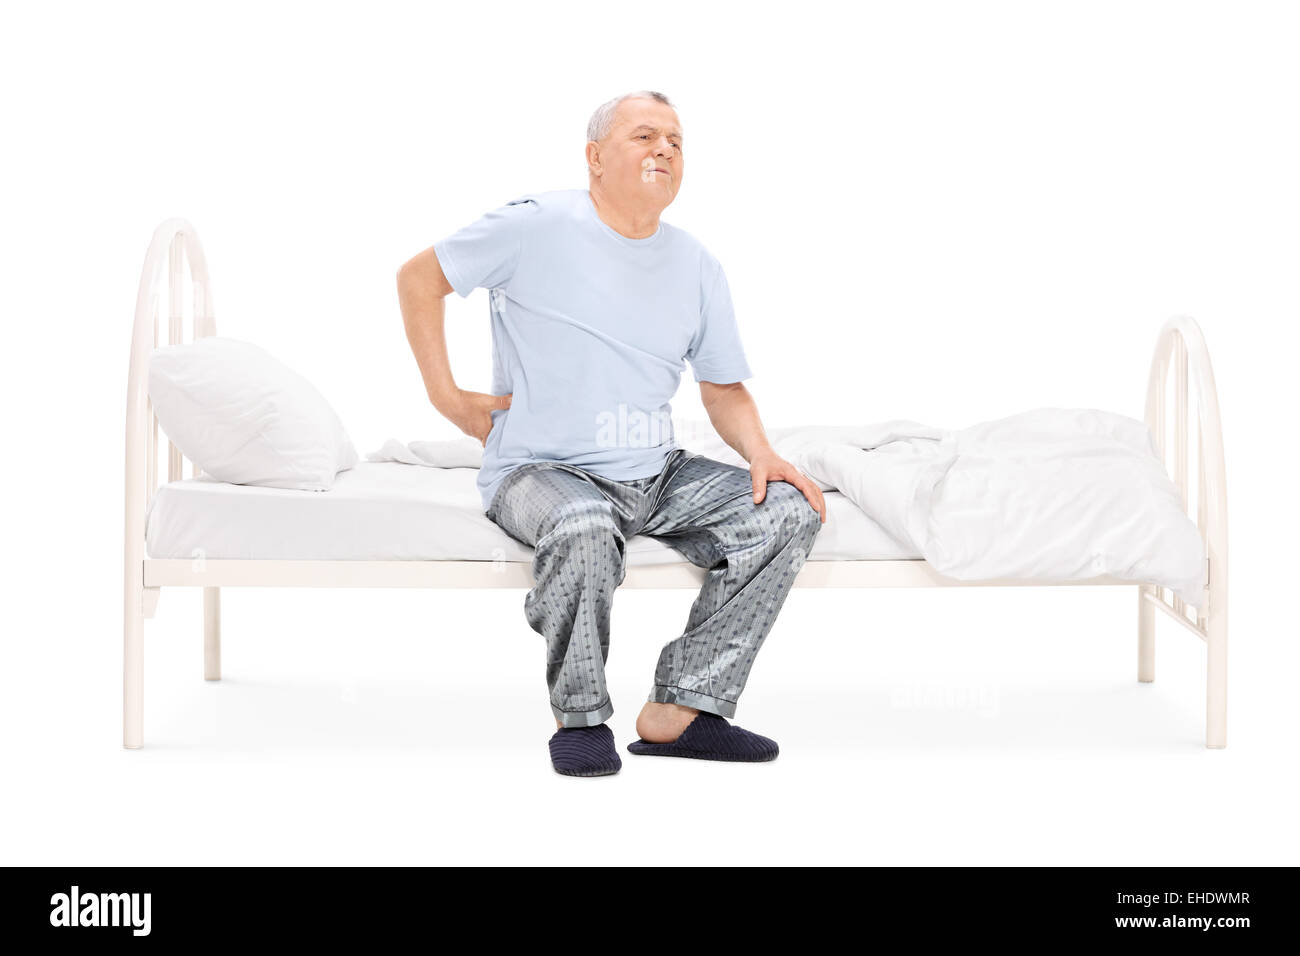 Senior waking up with a pain in his back isolated on white background Stock Photo